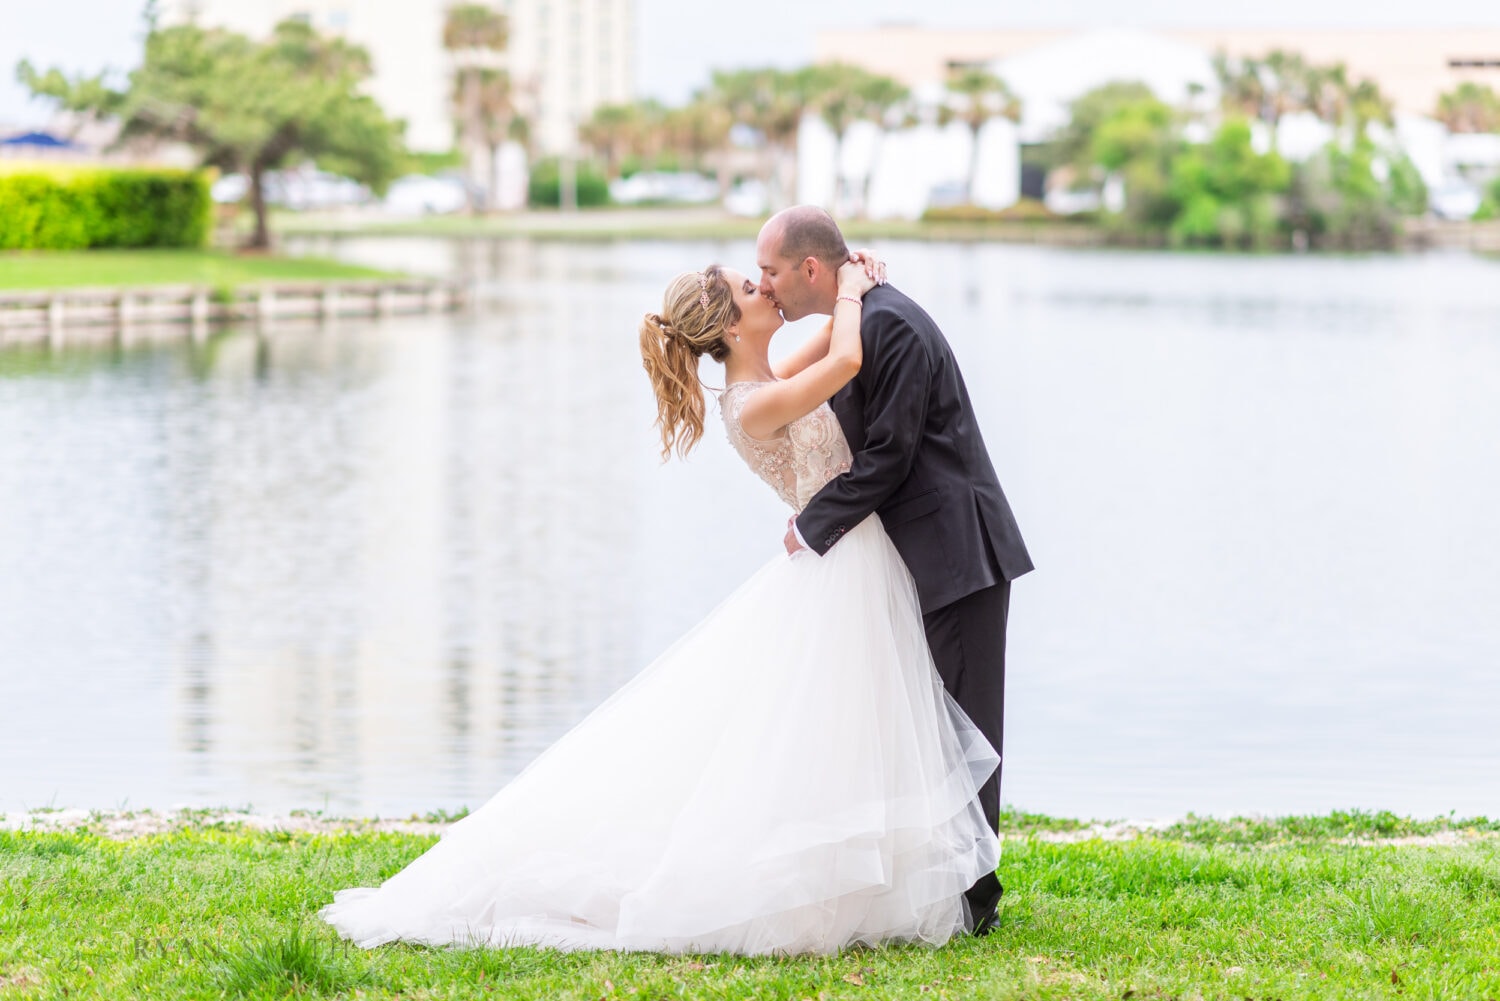 Groom leaning back bride for a kiss by the lake - Kingston Plantation Myrtle Beach